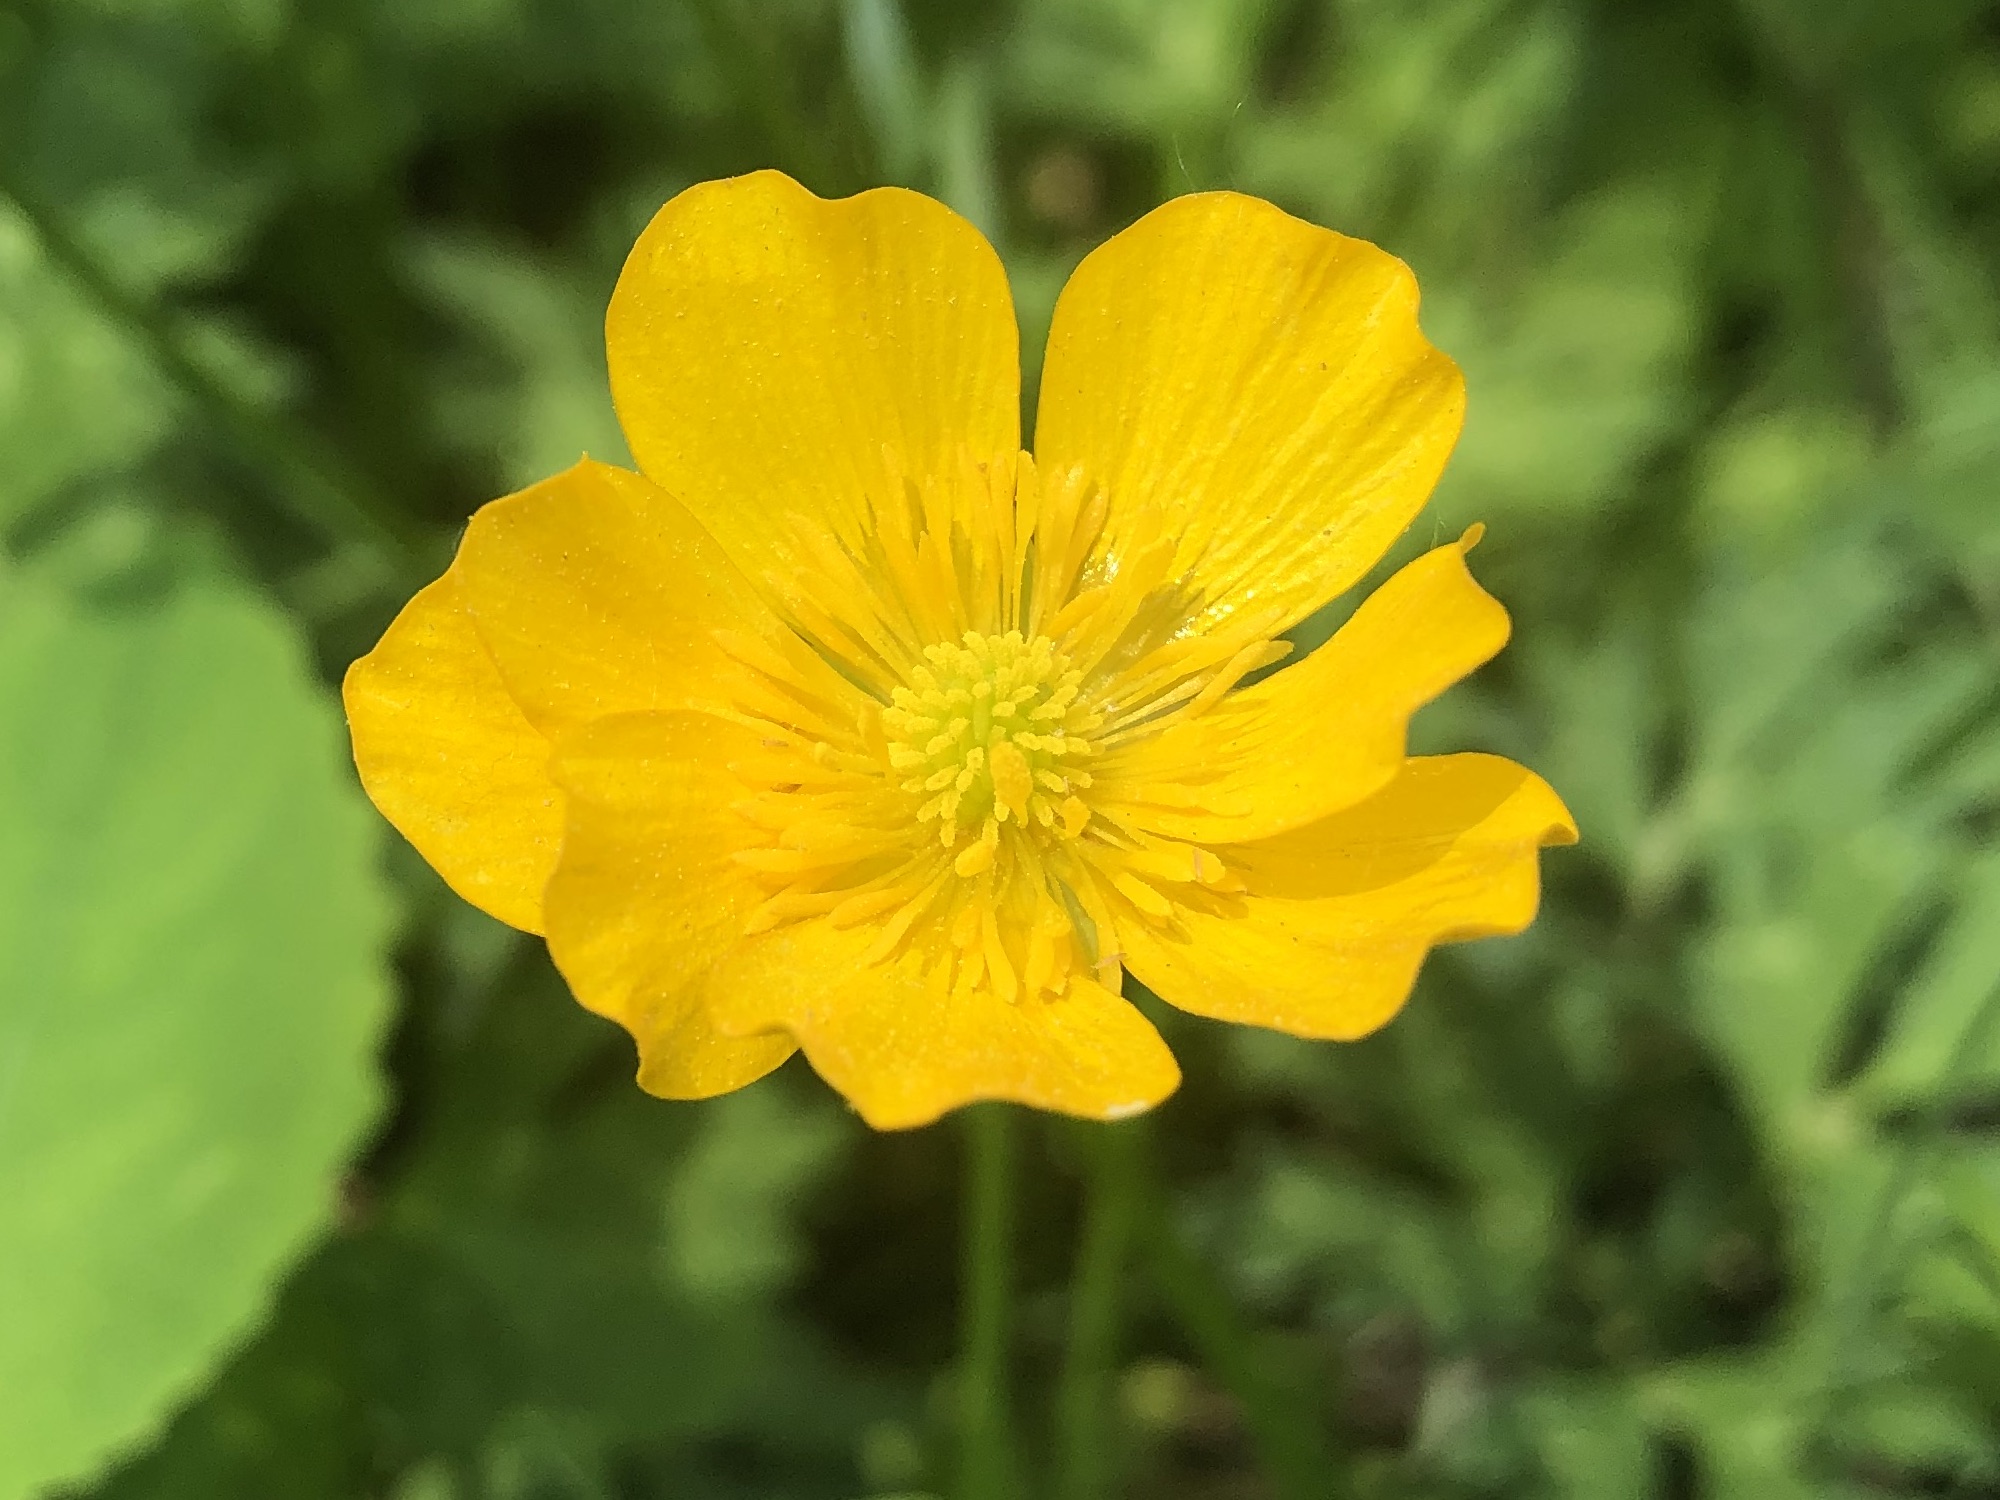 Creeping Buttercup along the bike path behind Gregory Street between Commonwealth and Glenway in Madison, Wisconsin on June 2, 2022.